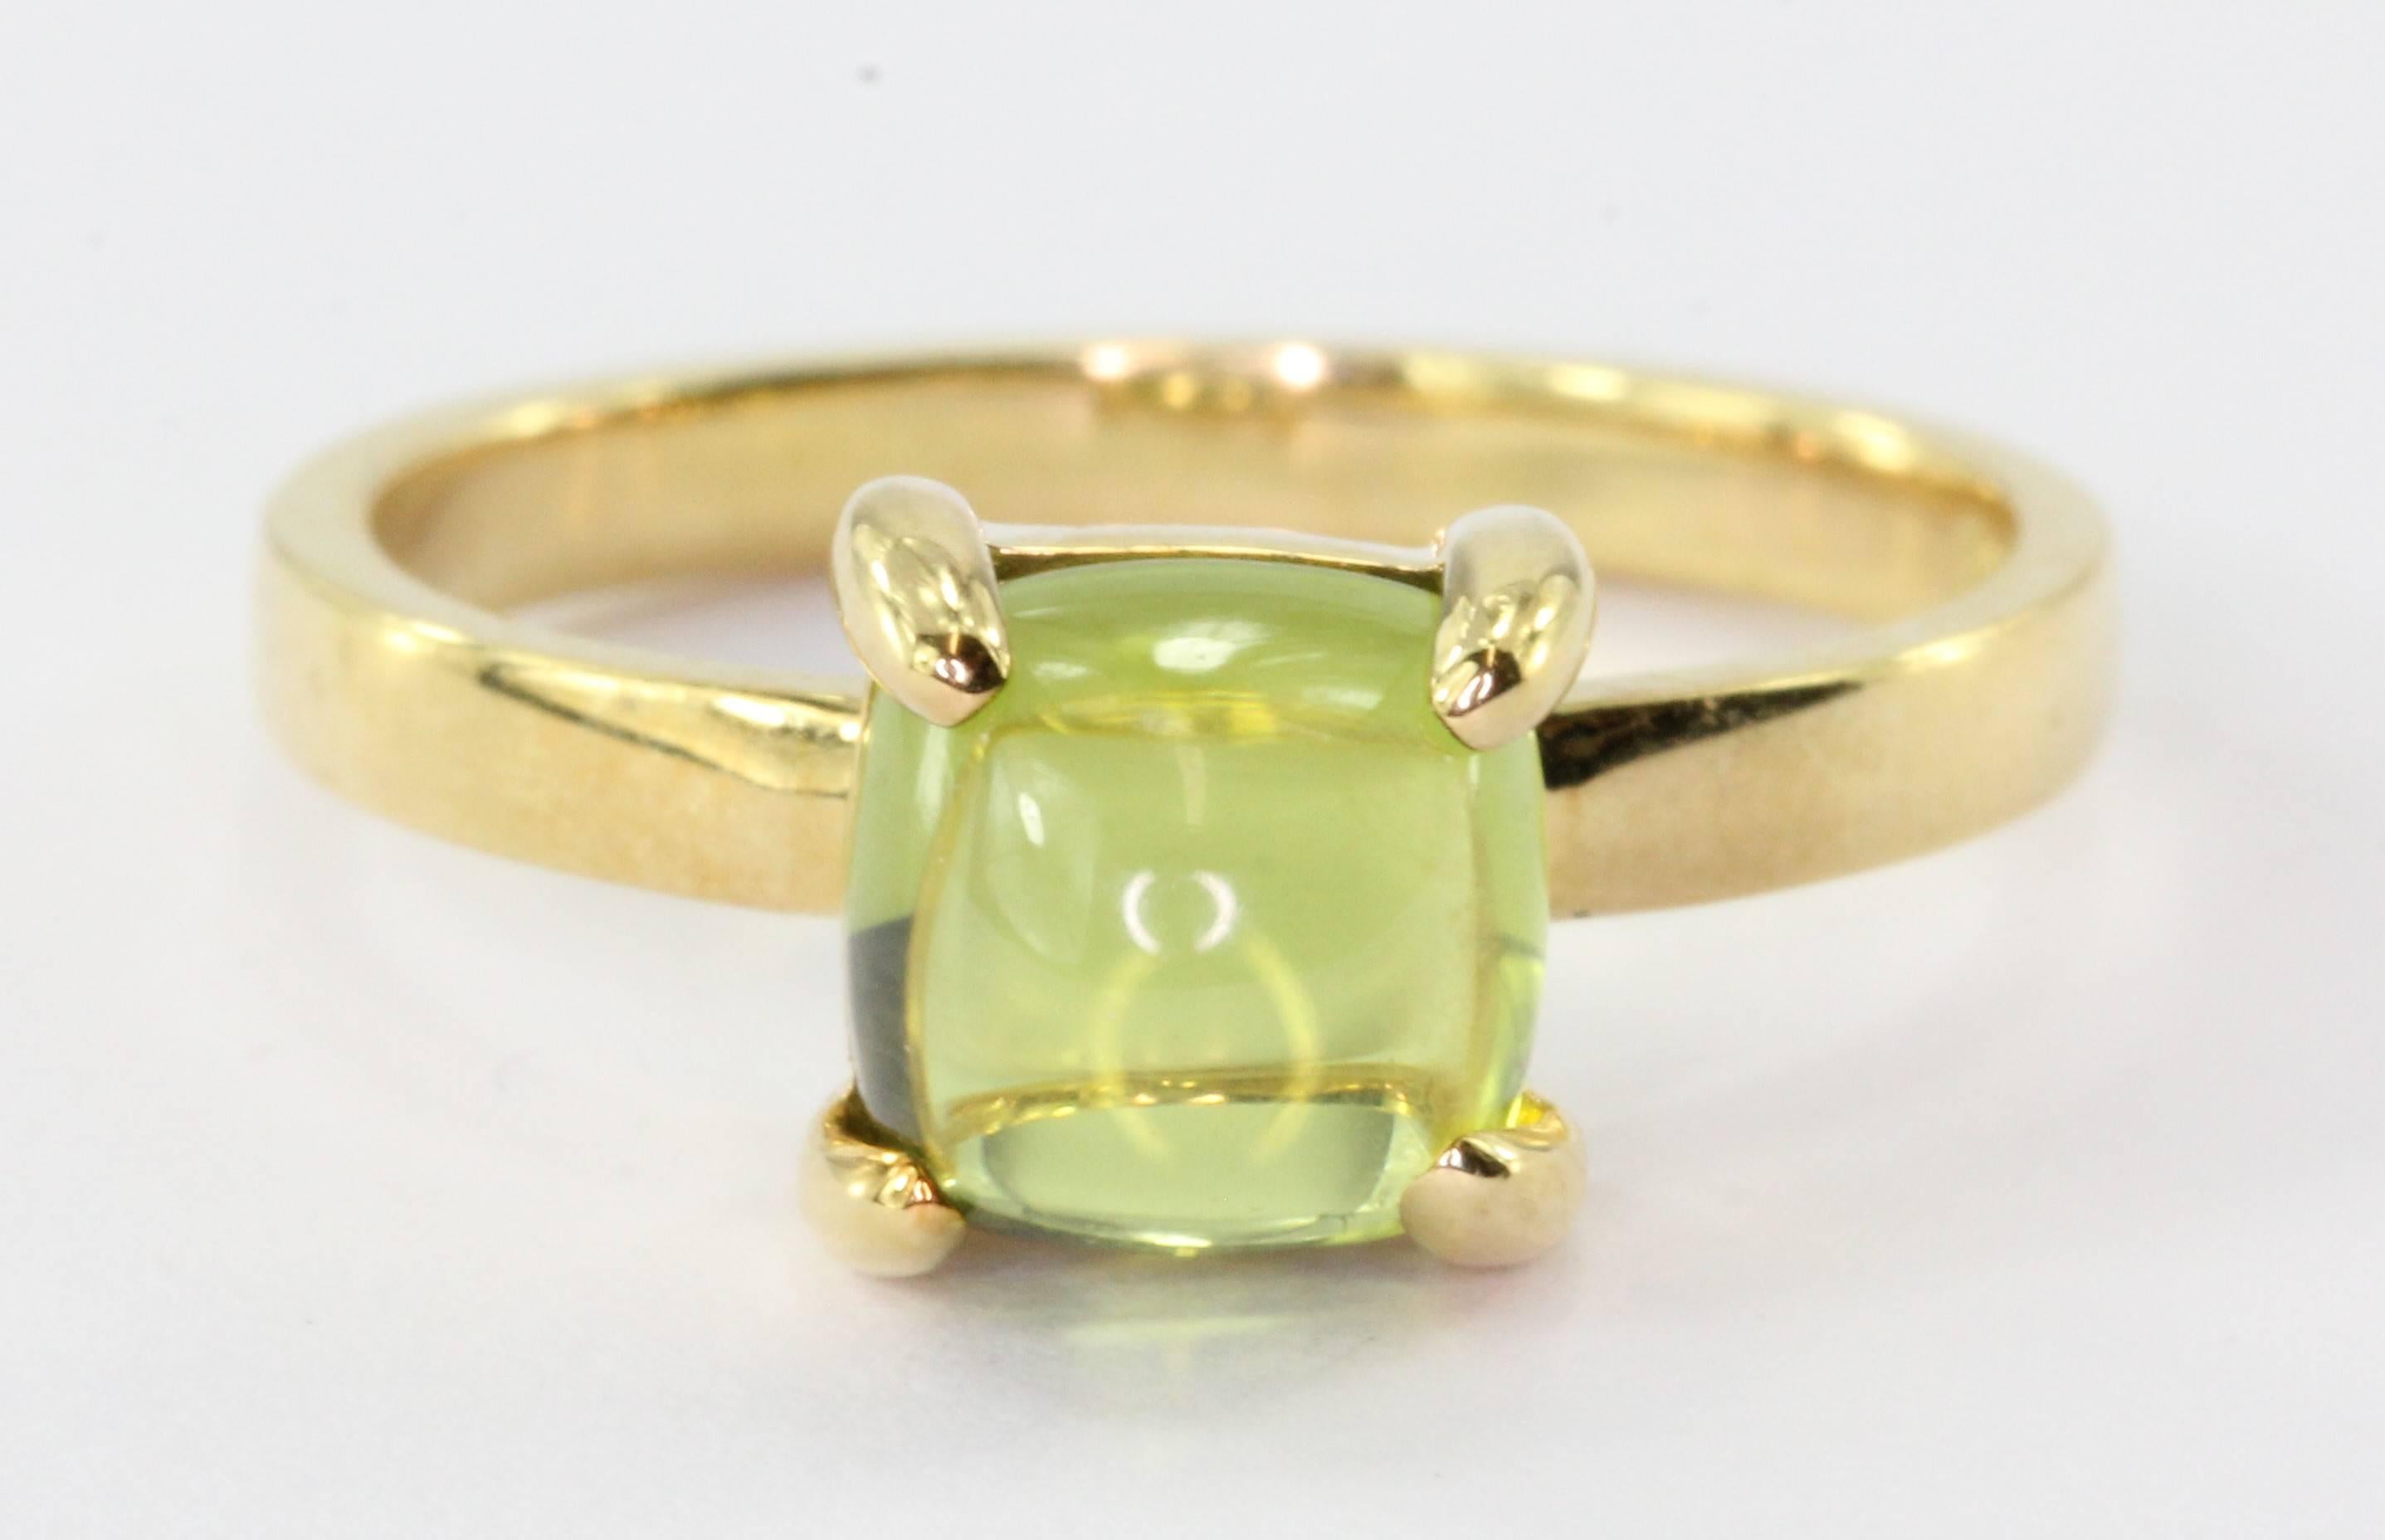 Tiffany 18K Gold Paloma Picasso Sugar Stack Peridot Ring. The ring is in excellent used estate condition and ready to wear. It does not come with a box or pouch. The ring is signed "Paloma Picasso Tiffany & Co 750". The ring is a size